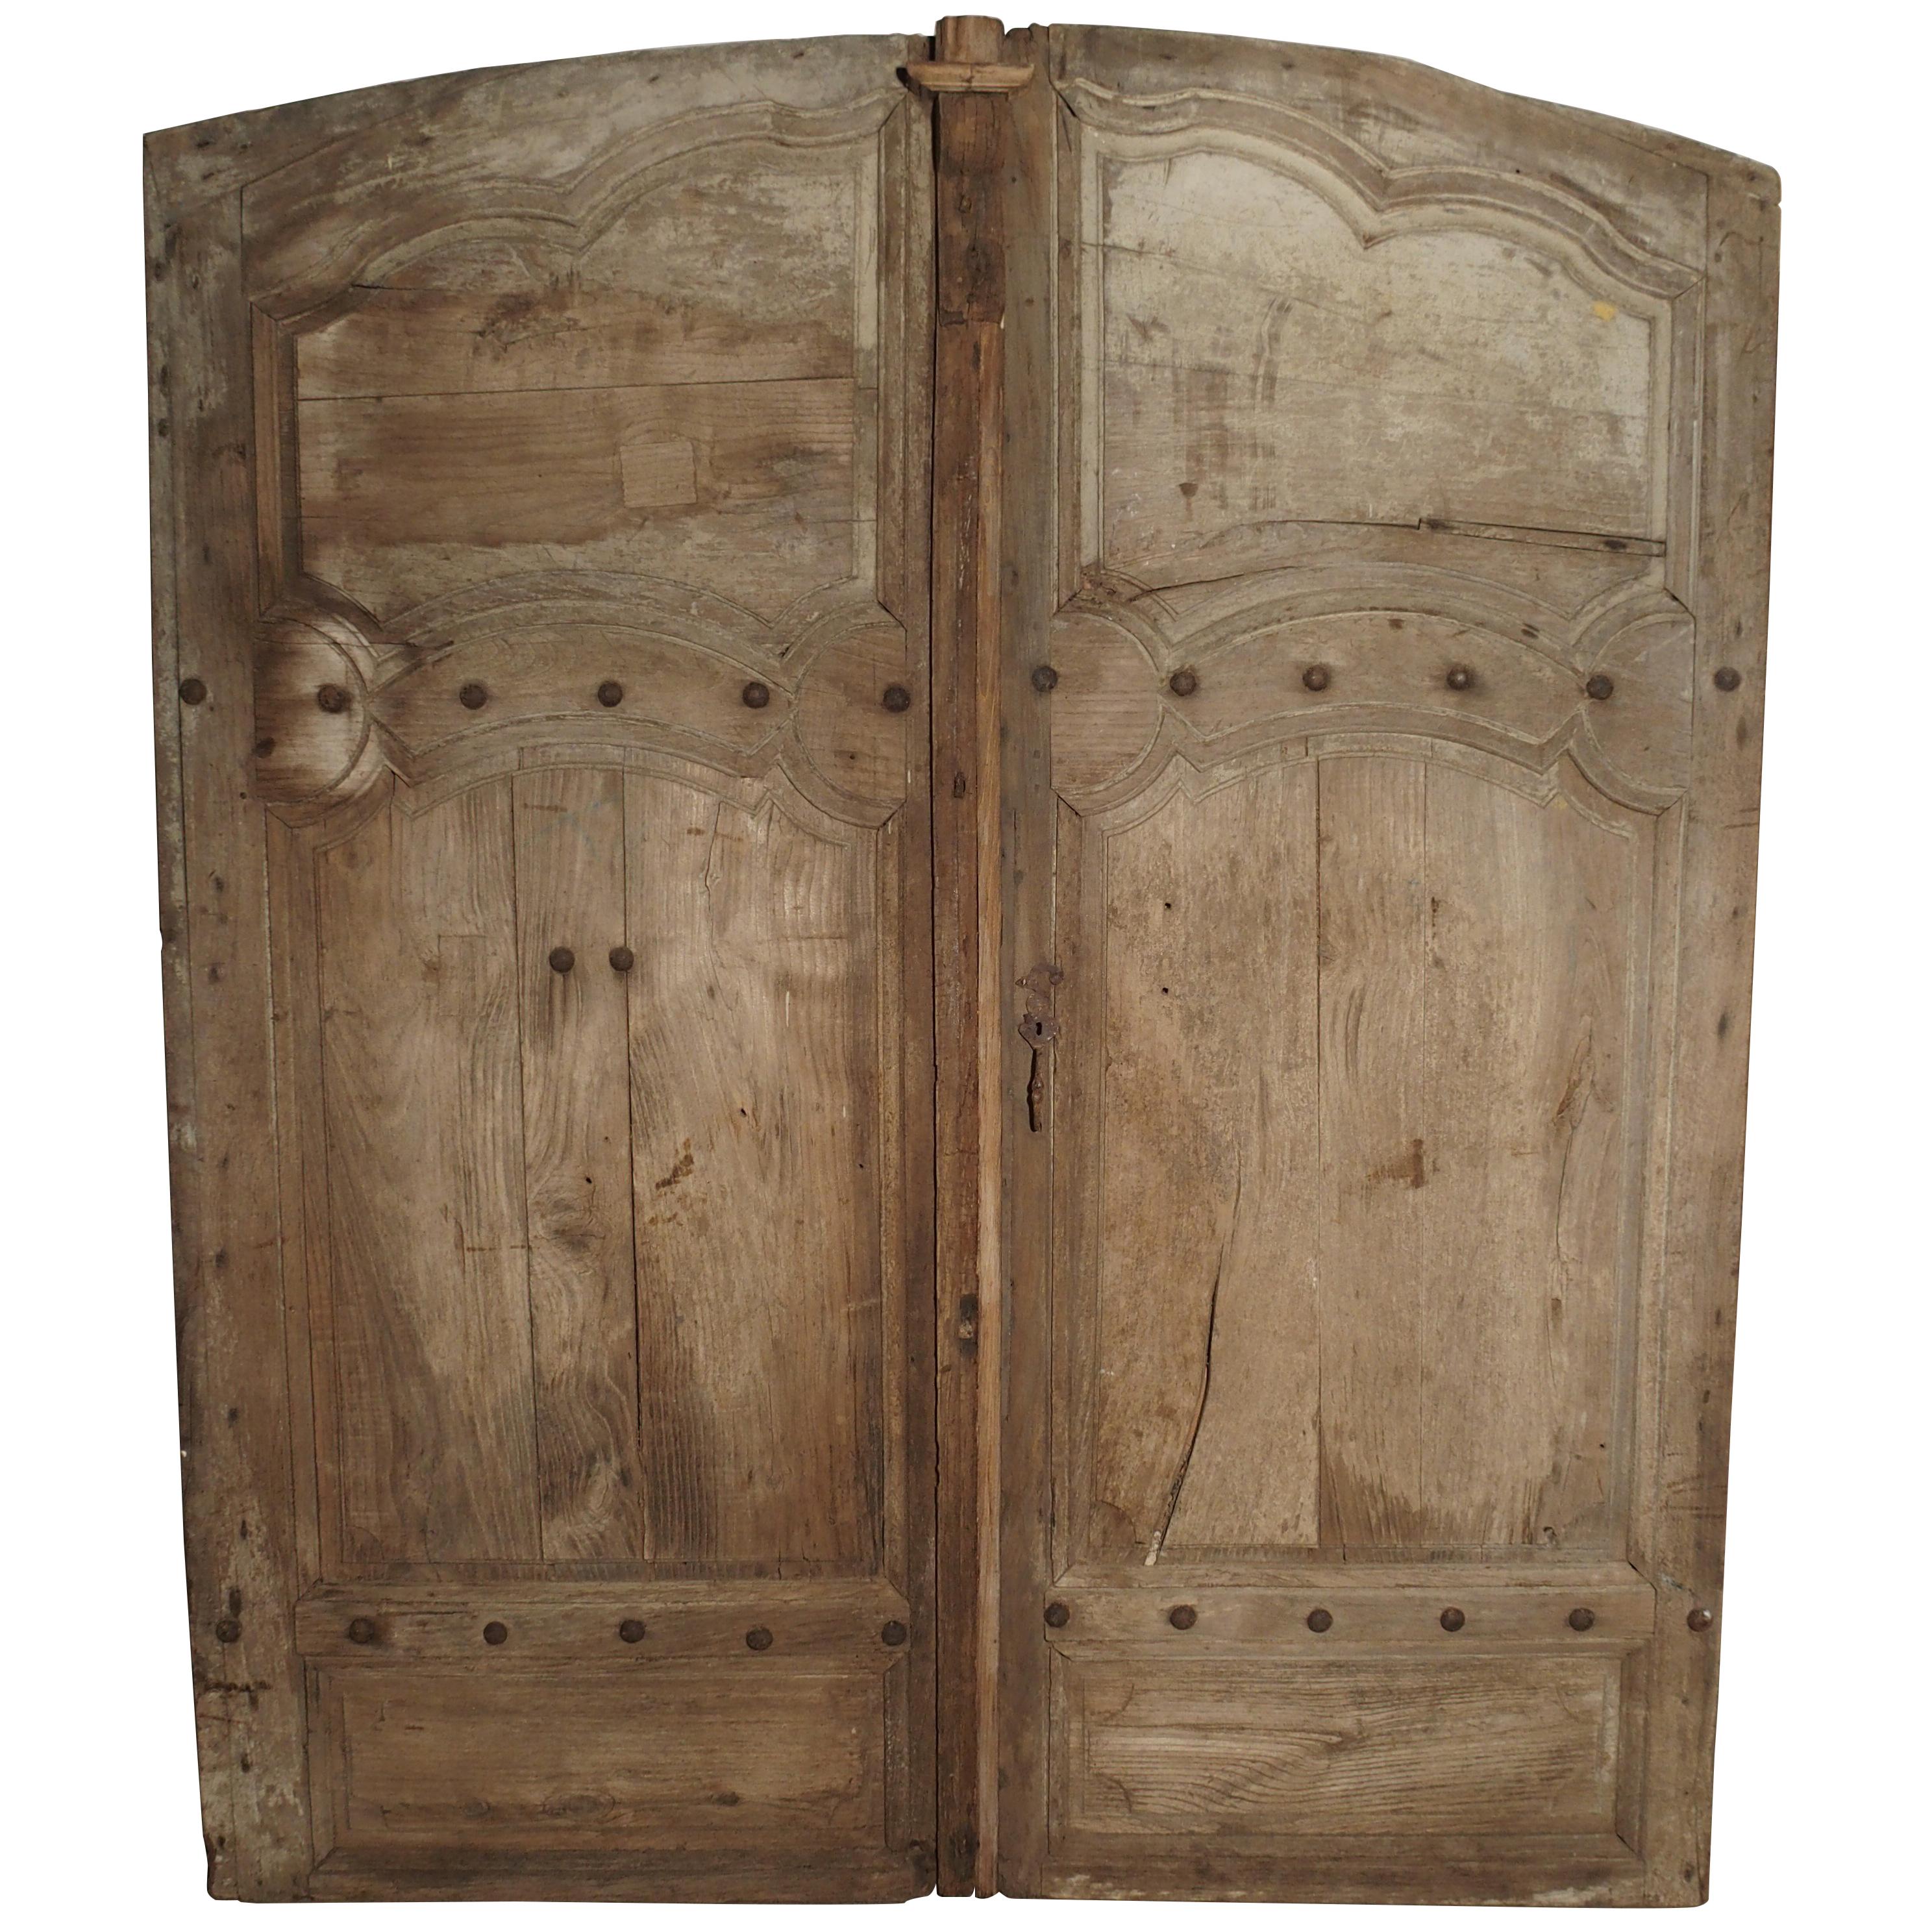 Pair of Antique French Oak Doors from Burgundy, 1700s